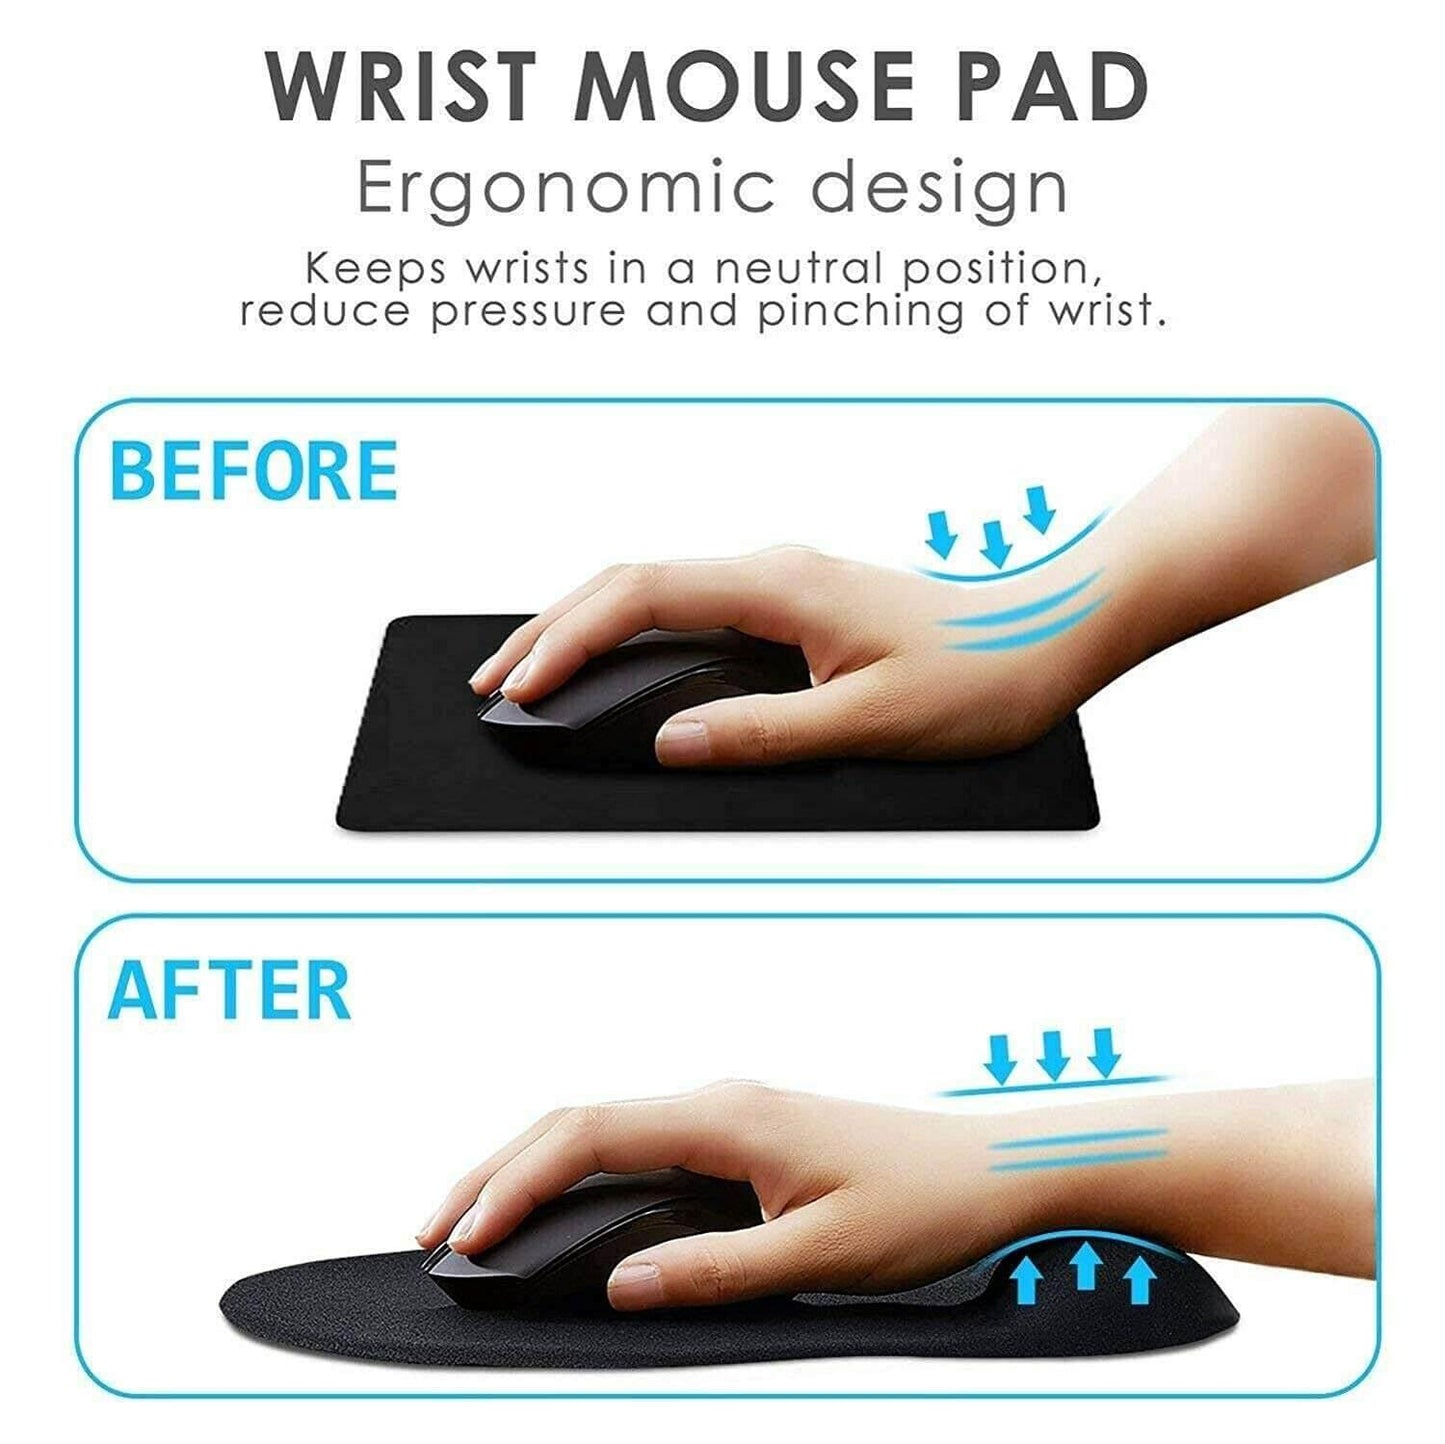 HP Wired Mouse USB Optical with Gel Mousepad 2U2H5P3 DPI 1200 - GADGET WAGON Mice & Trackballs